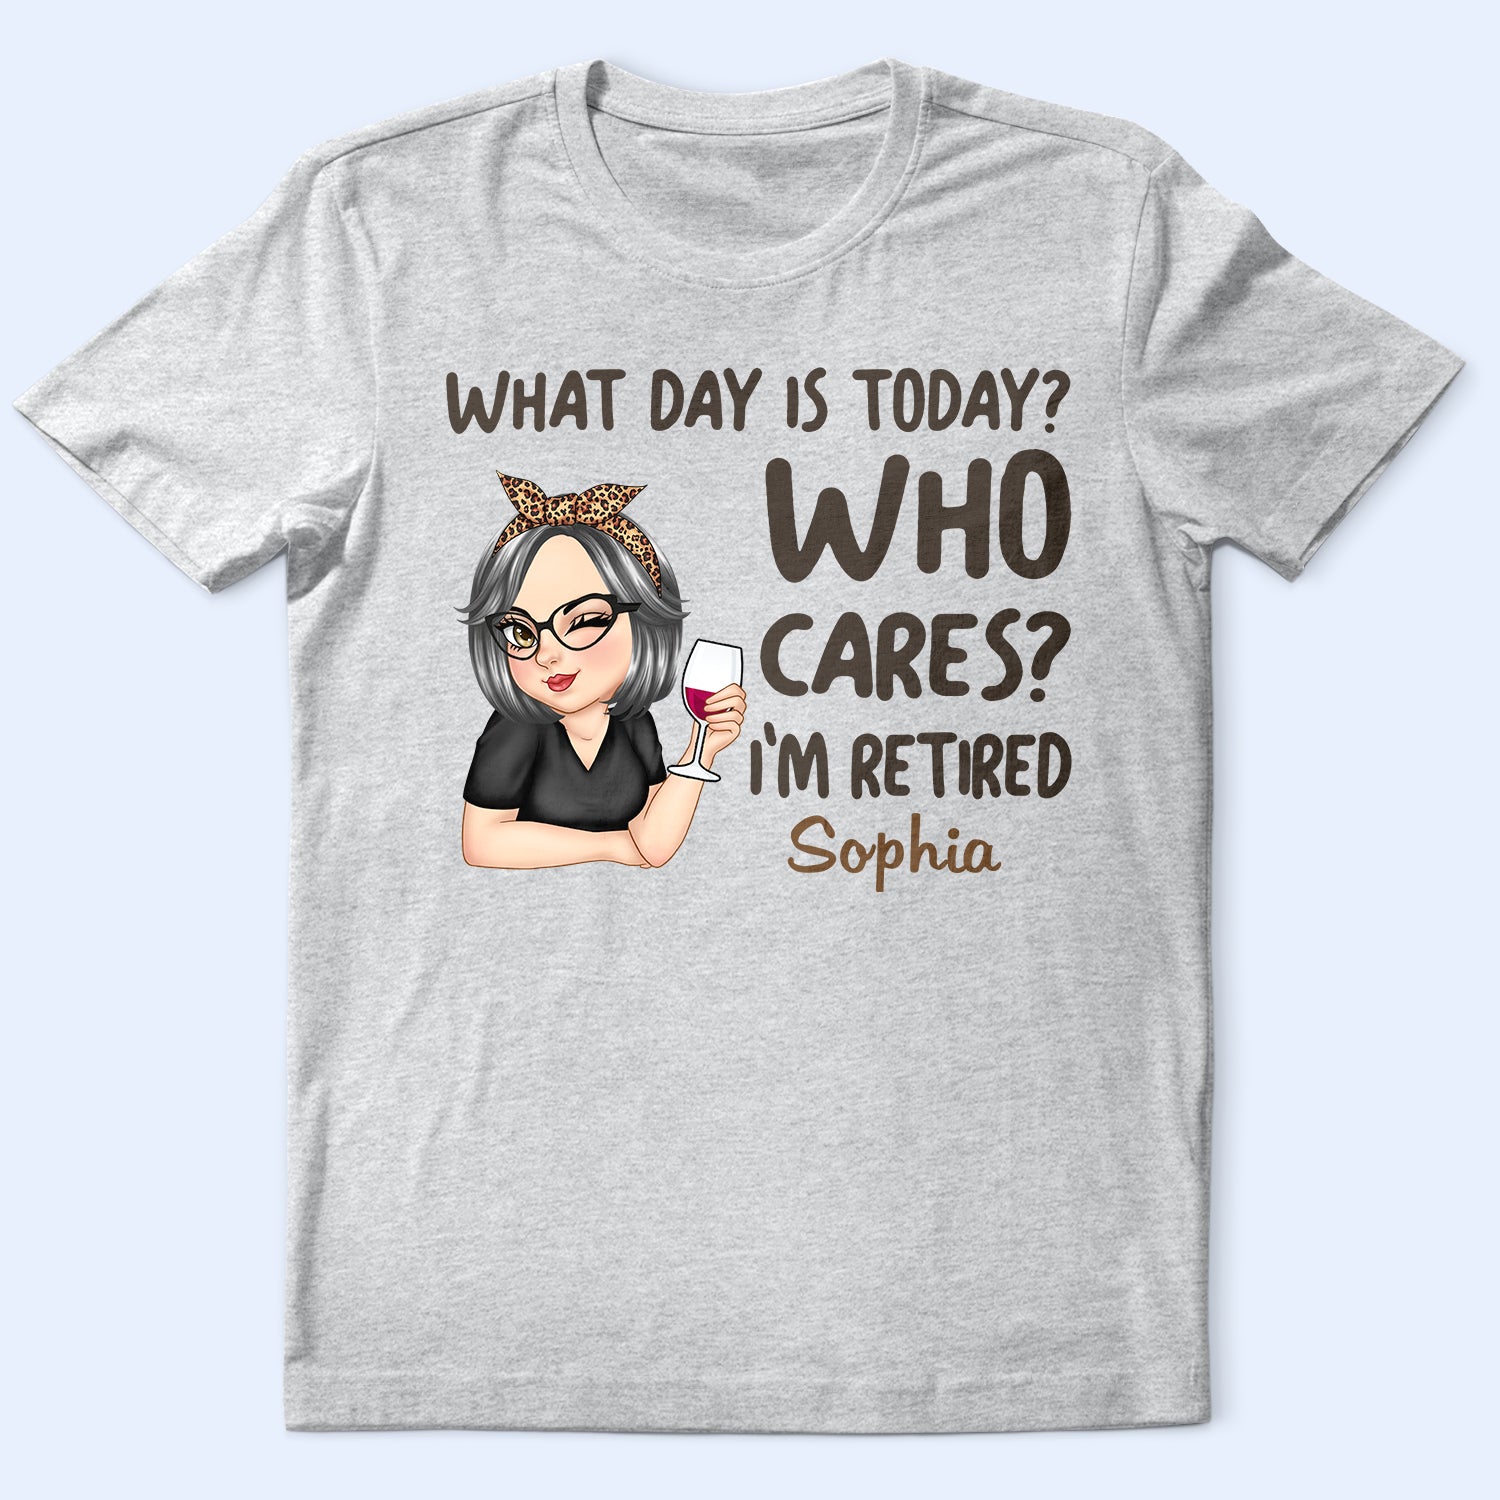 What Day Is Today Who Cares - Retirement Gift For Women, Grandma, Mom, Nana - Personalized T Shirt